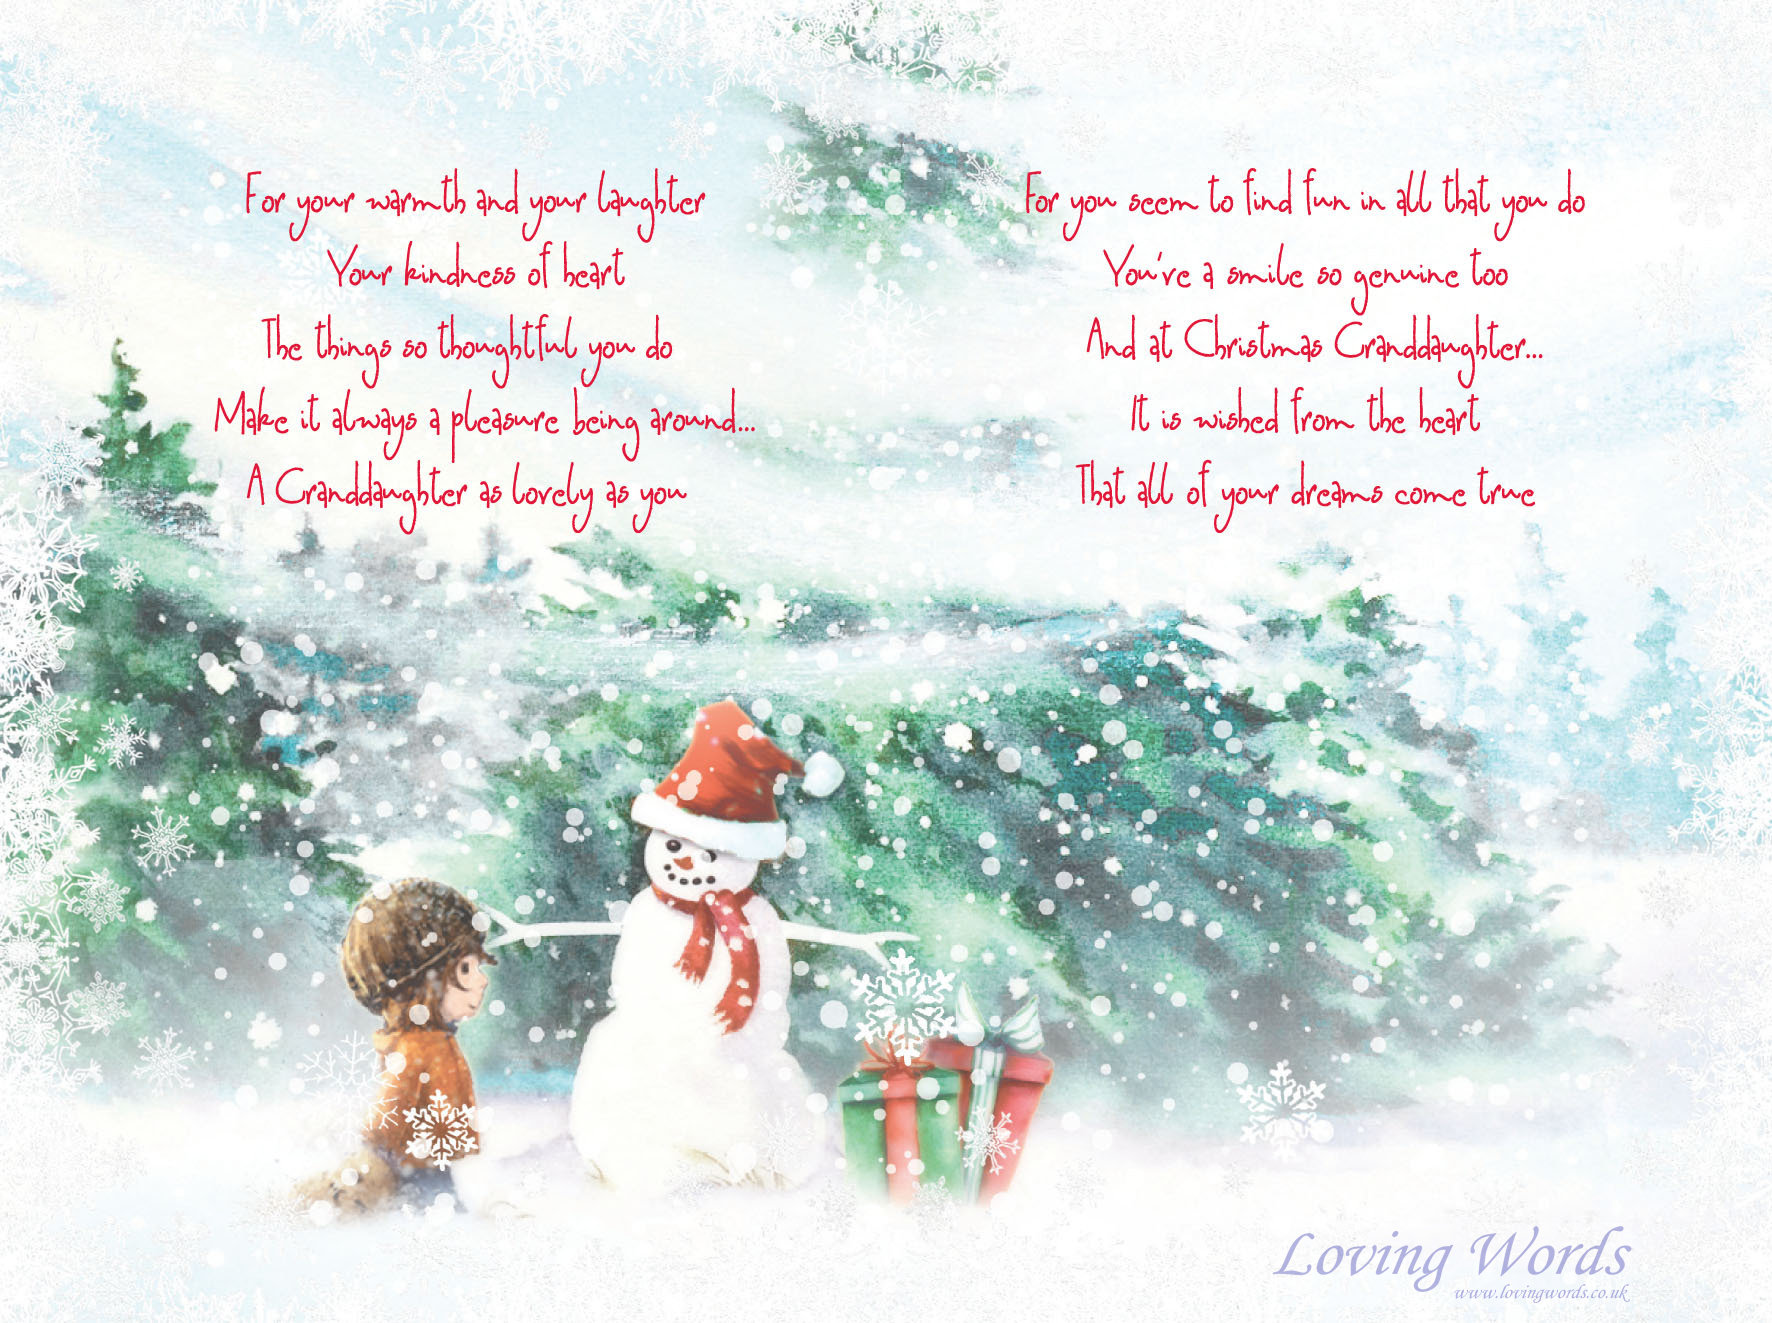 With Love Granddaughter at Christmas | Greeting Cards by Loving Words